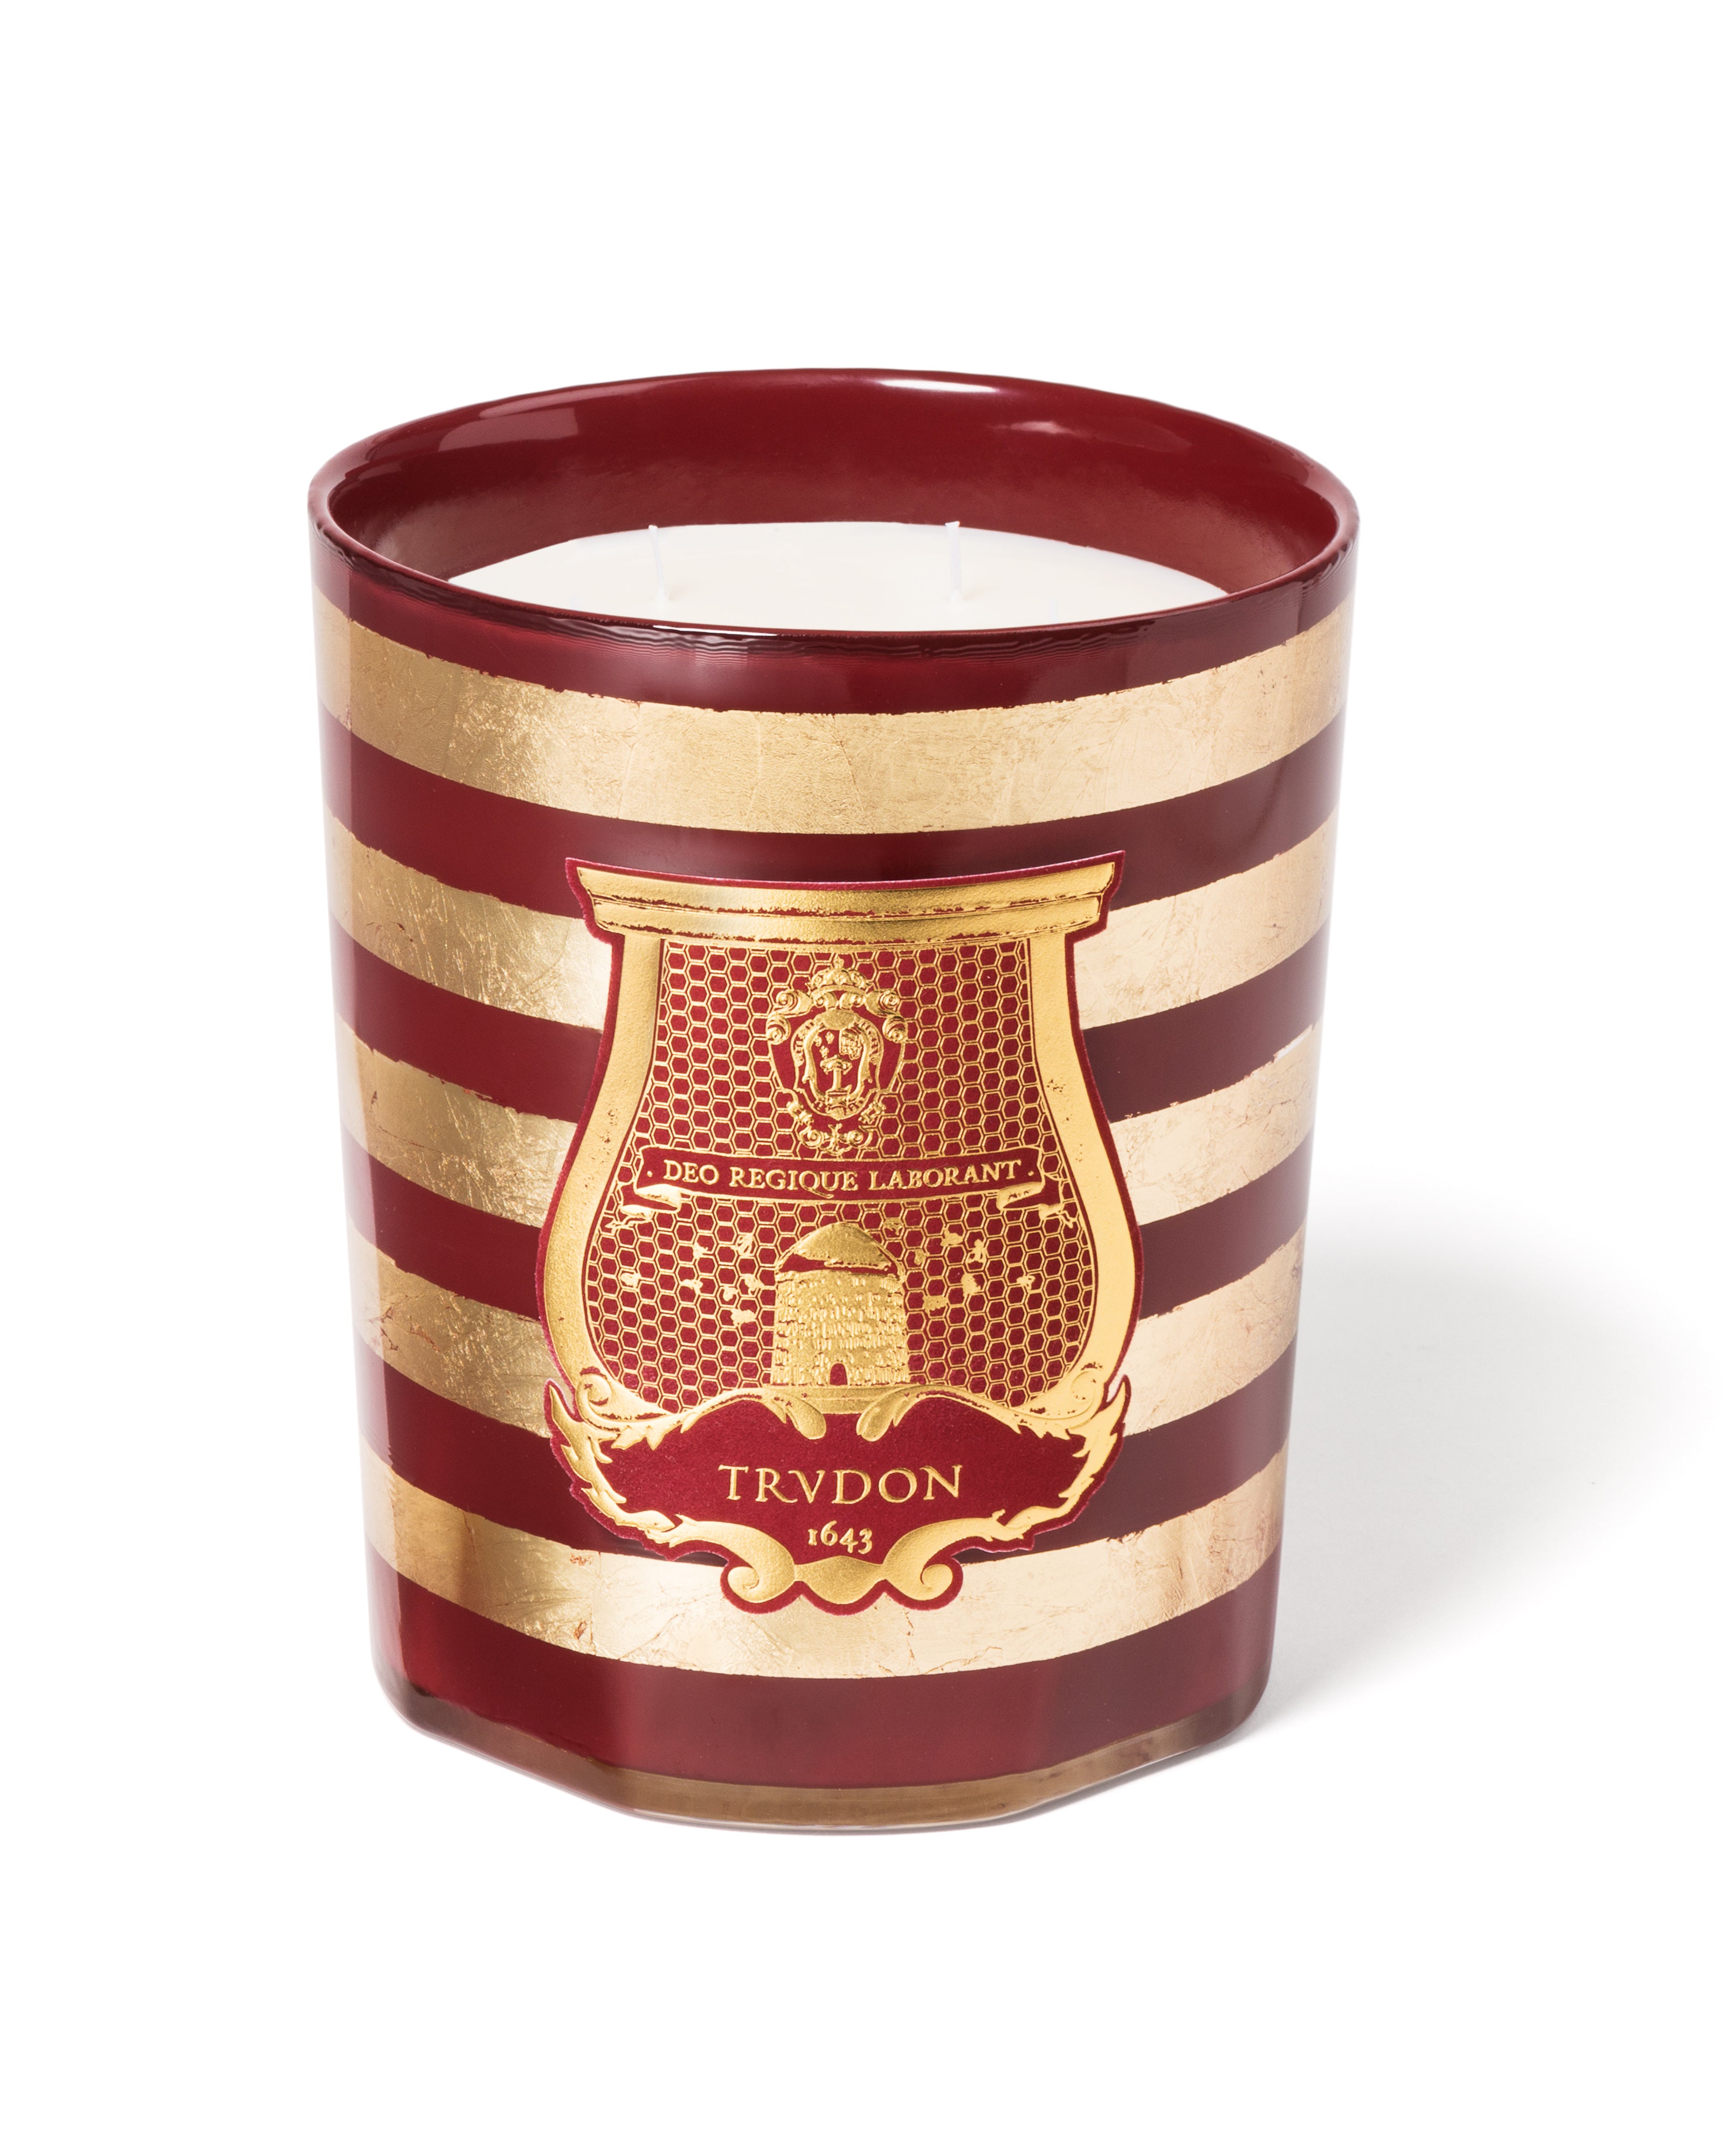 Cire Trudon x Balmain Limited Edition Candle Grande 3KG - Red